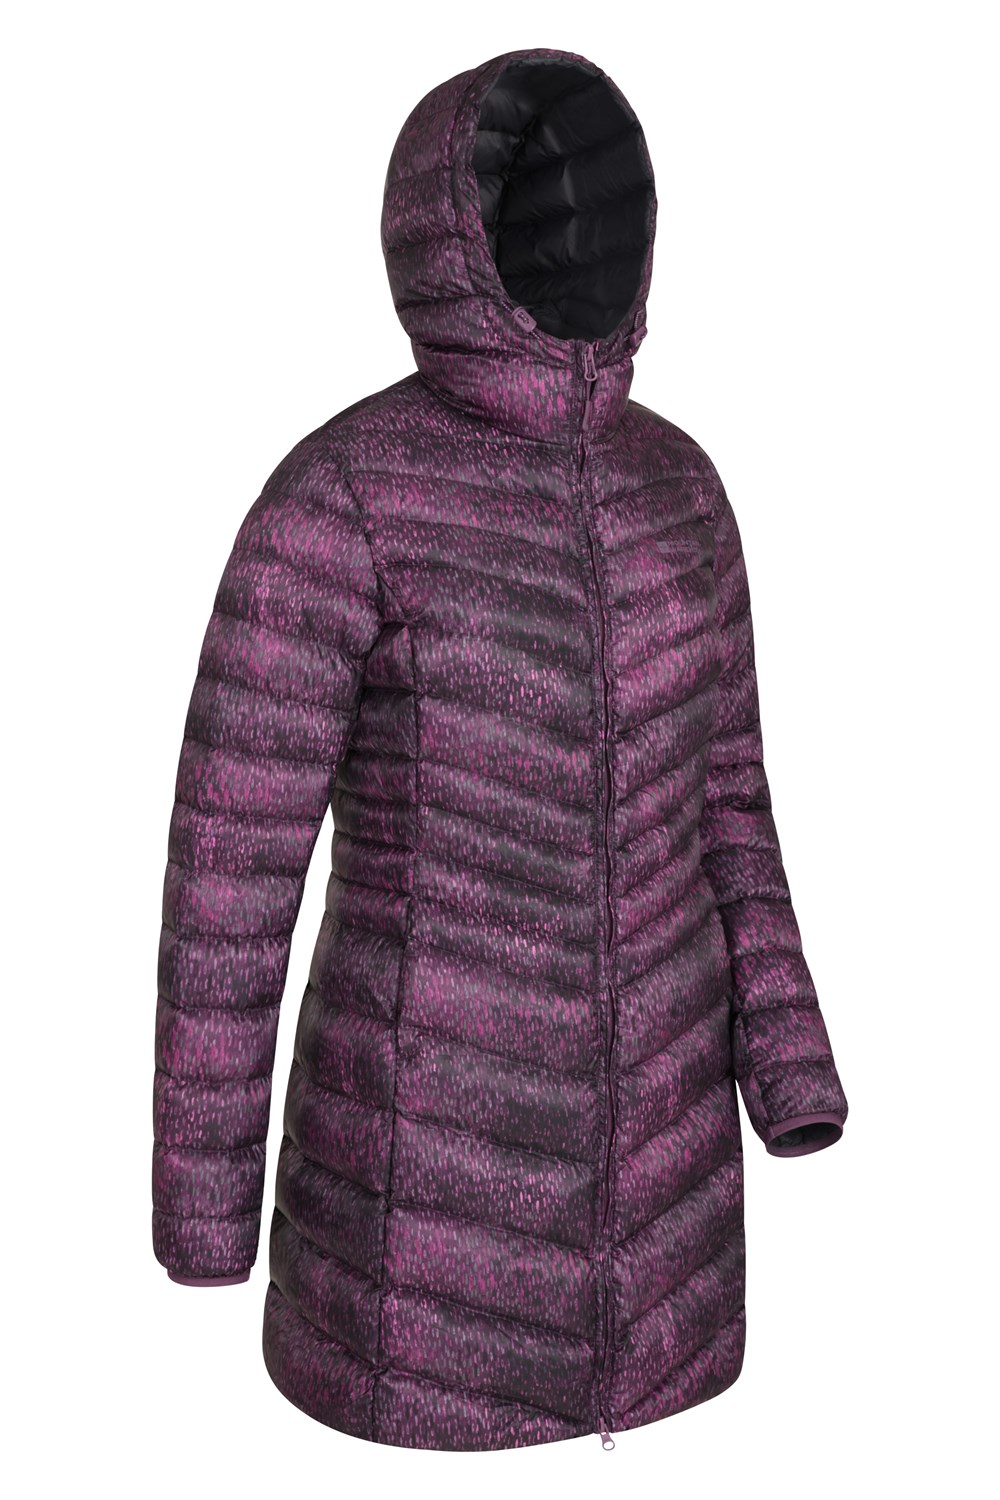 Mountain Warehouse Womens Long Padded Jacket Water Resistant Winter ...